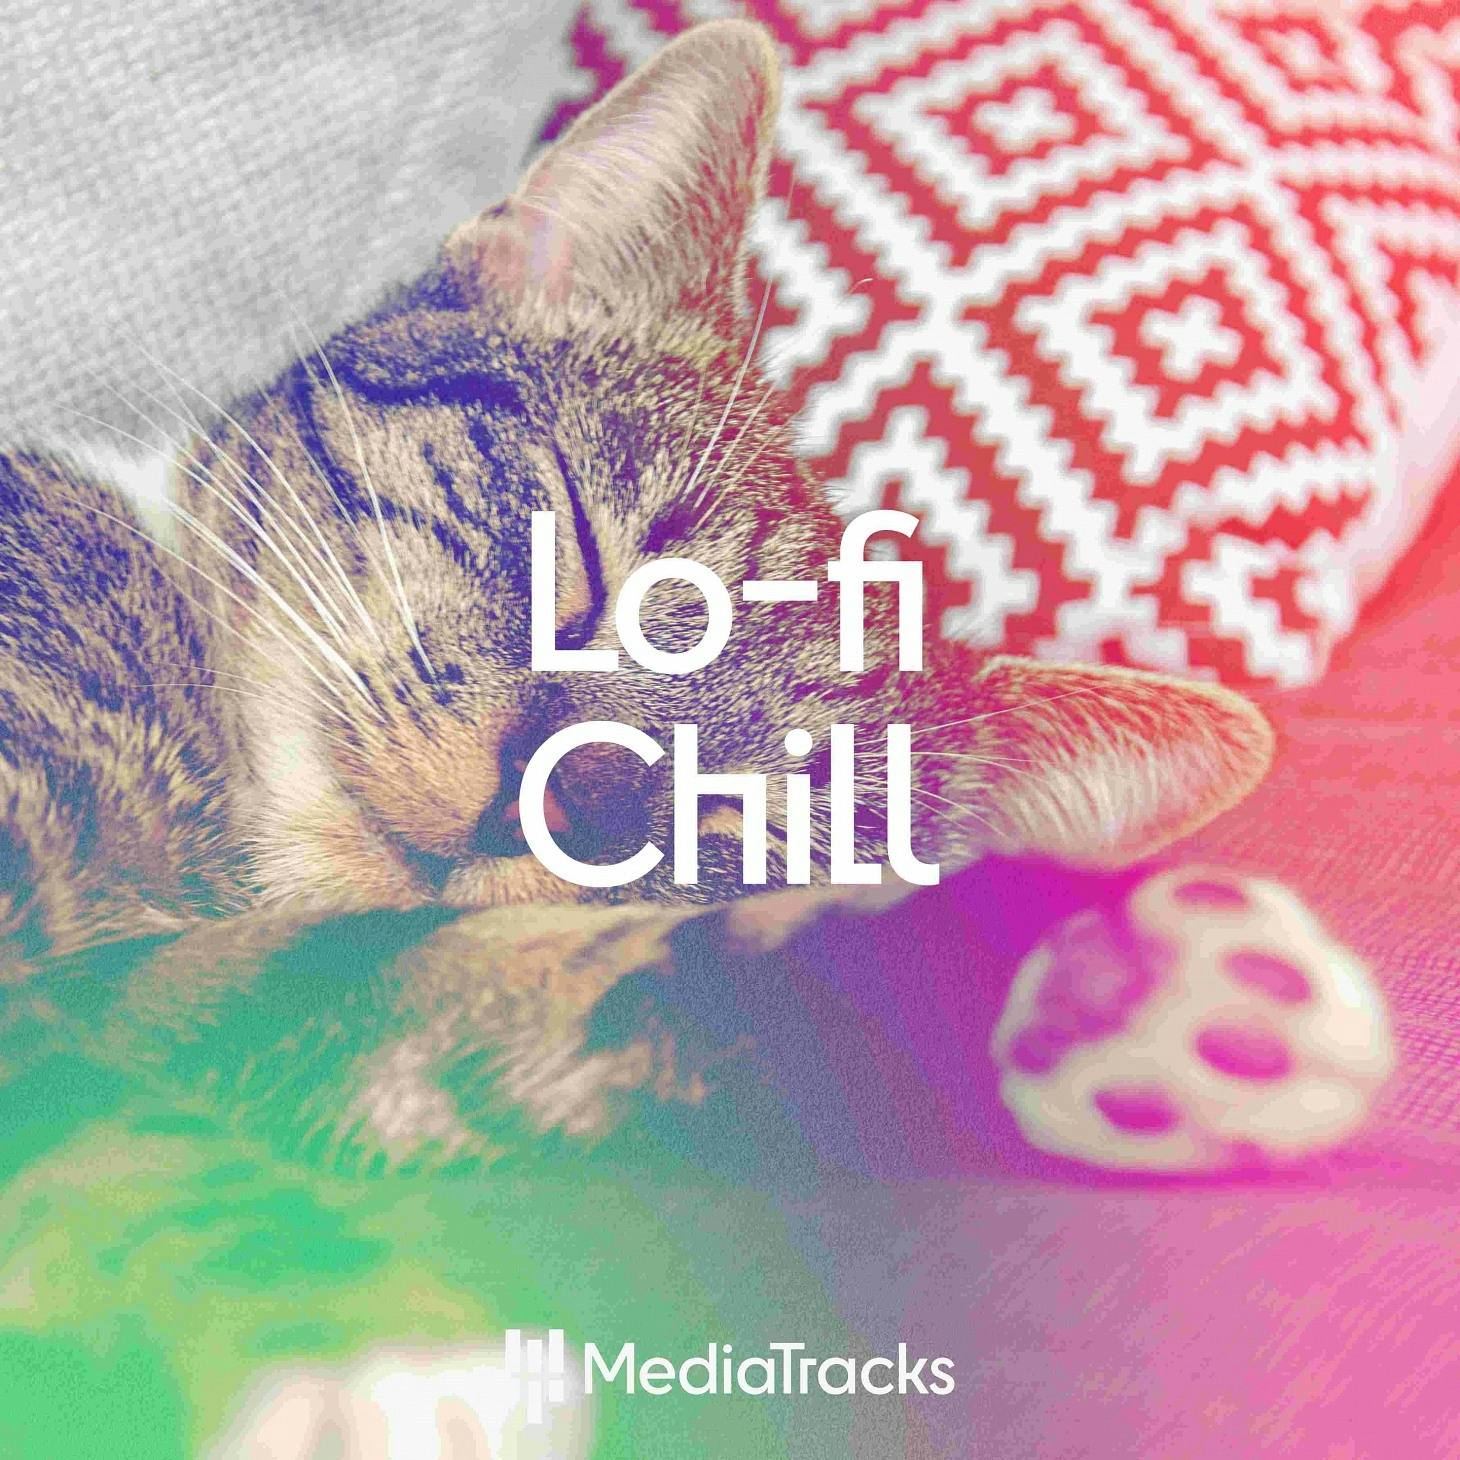 Lo-fi and Chill